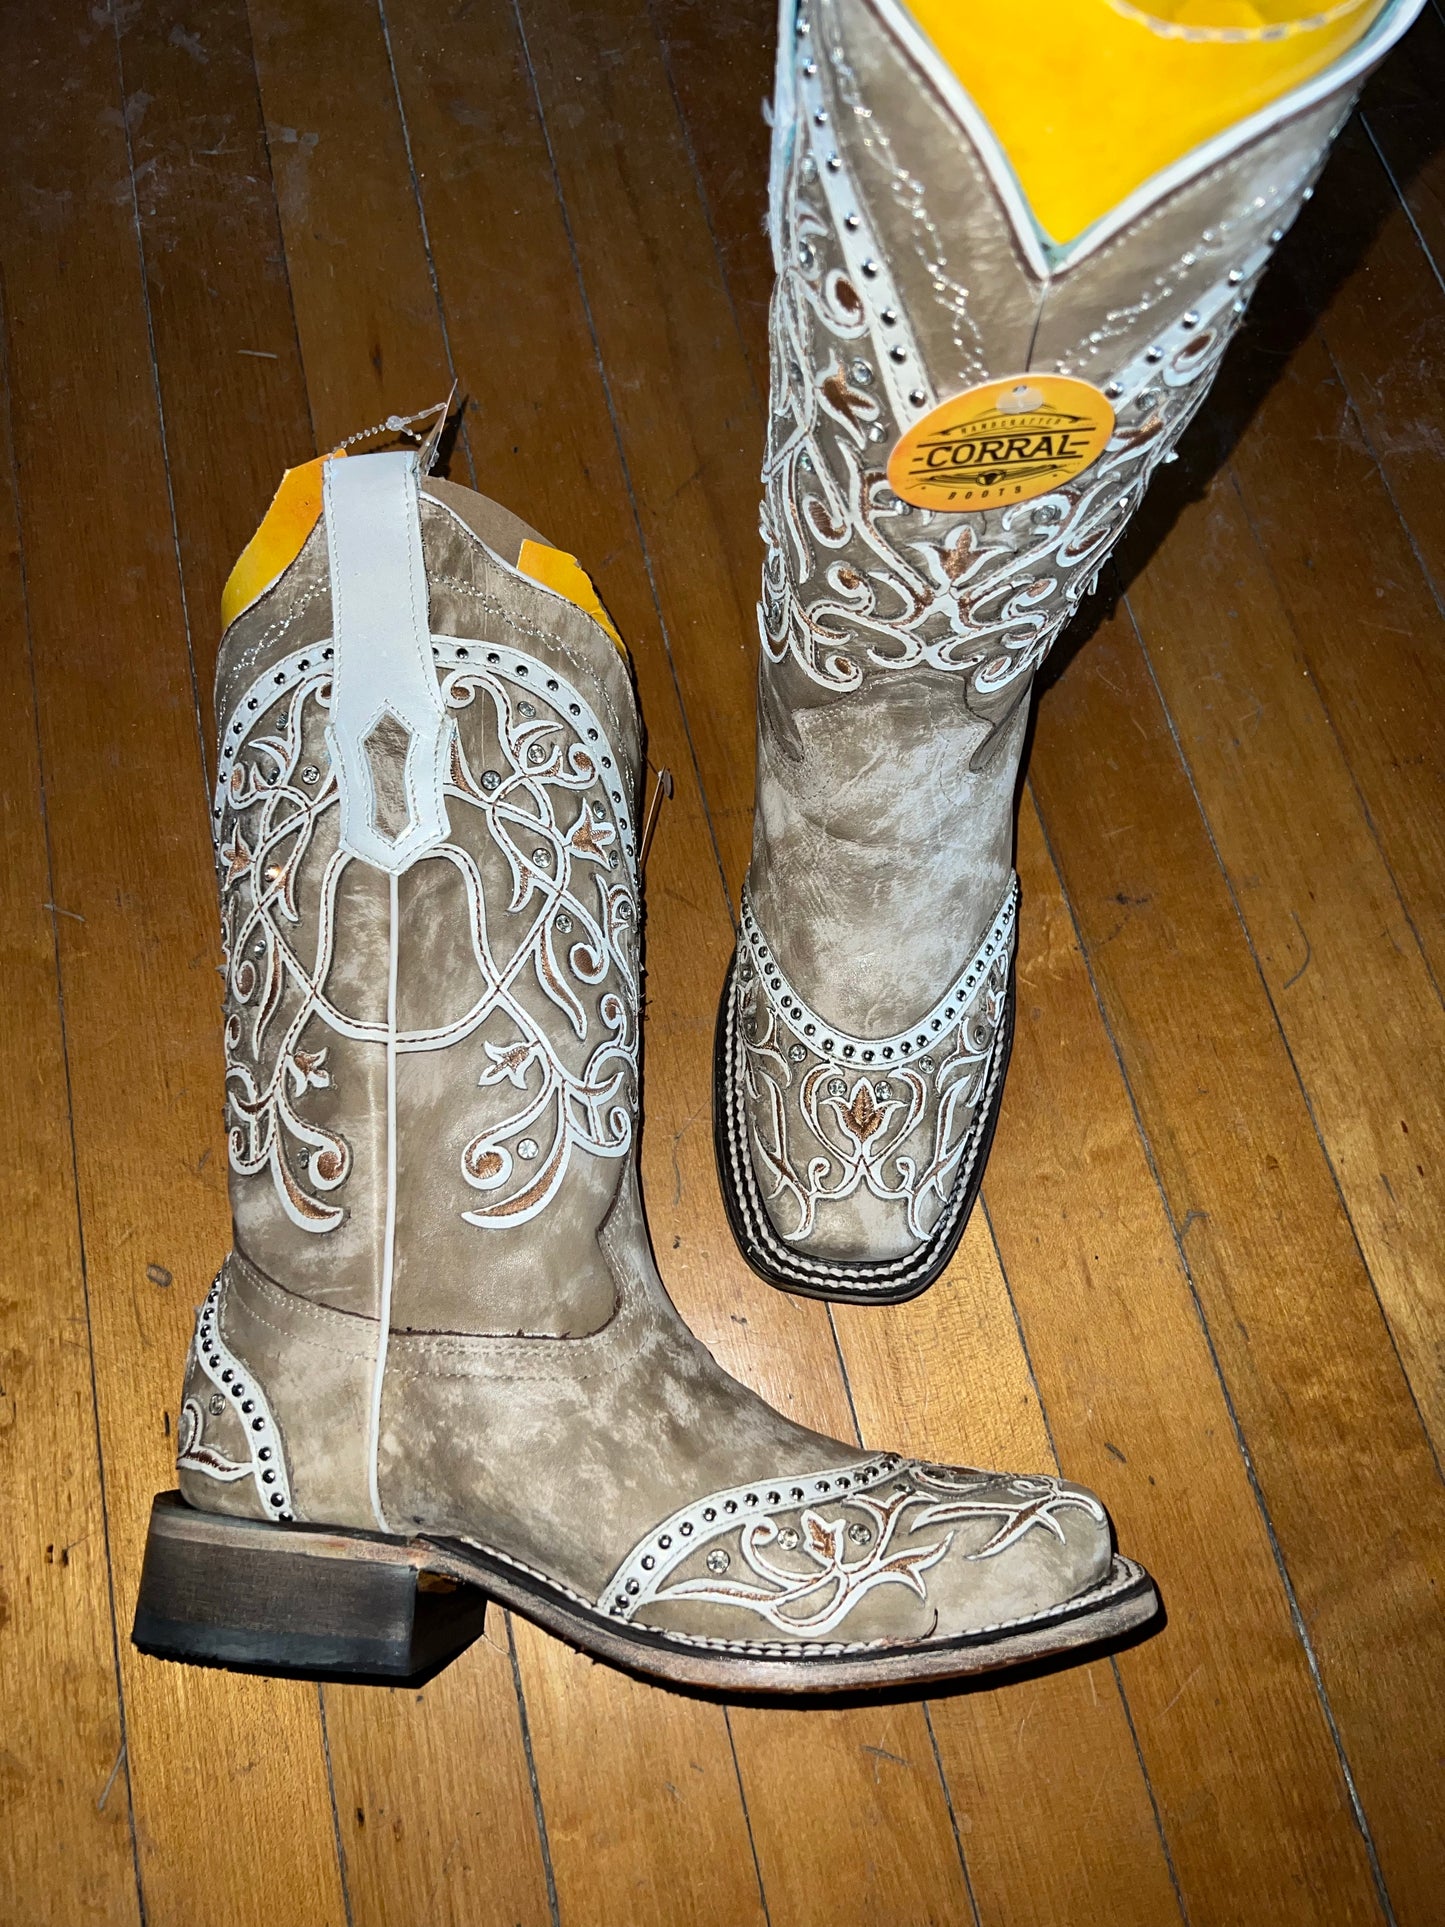 The Sarah Corral Boots